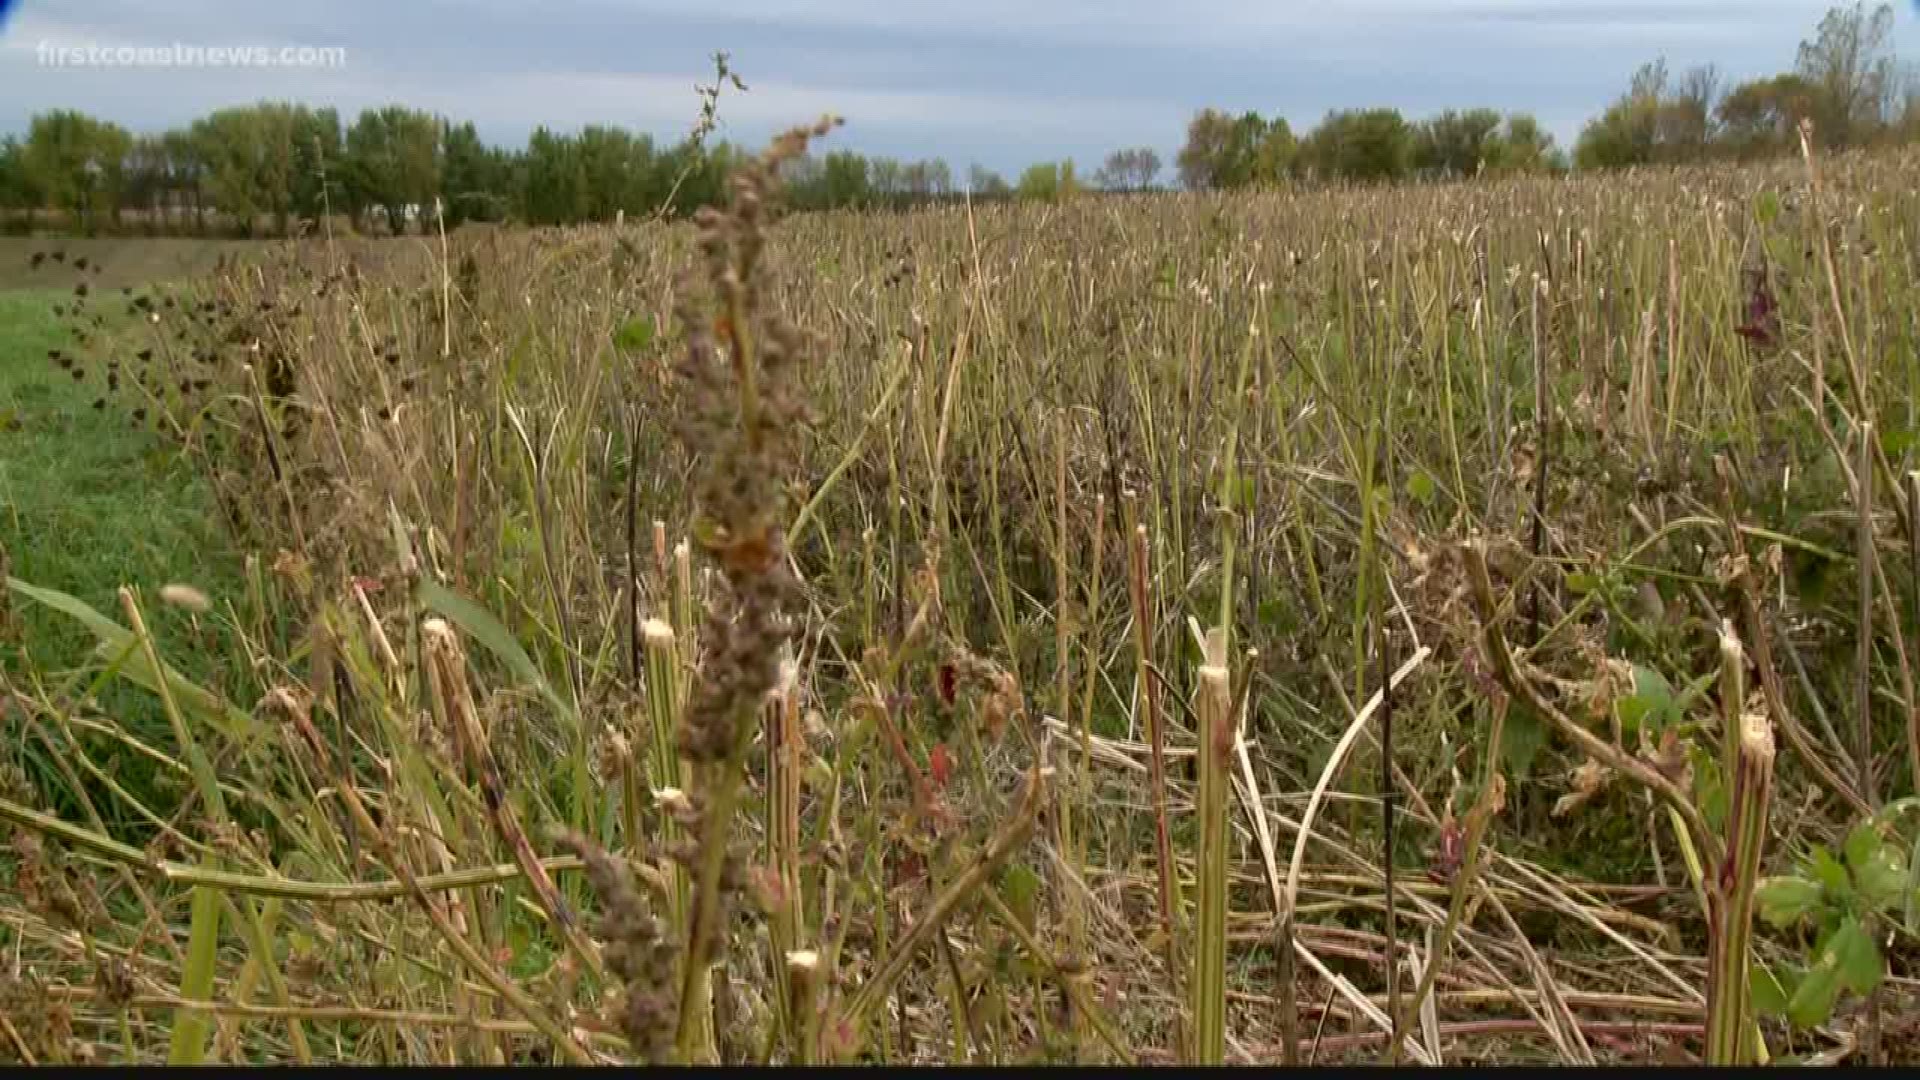 Hemp could be a new cash crop for Florida farmers.